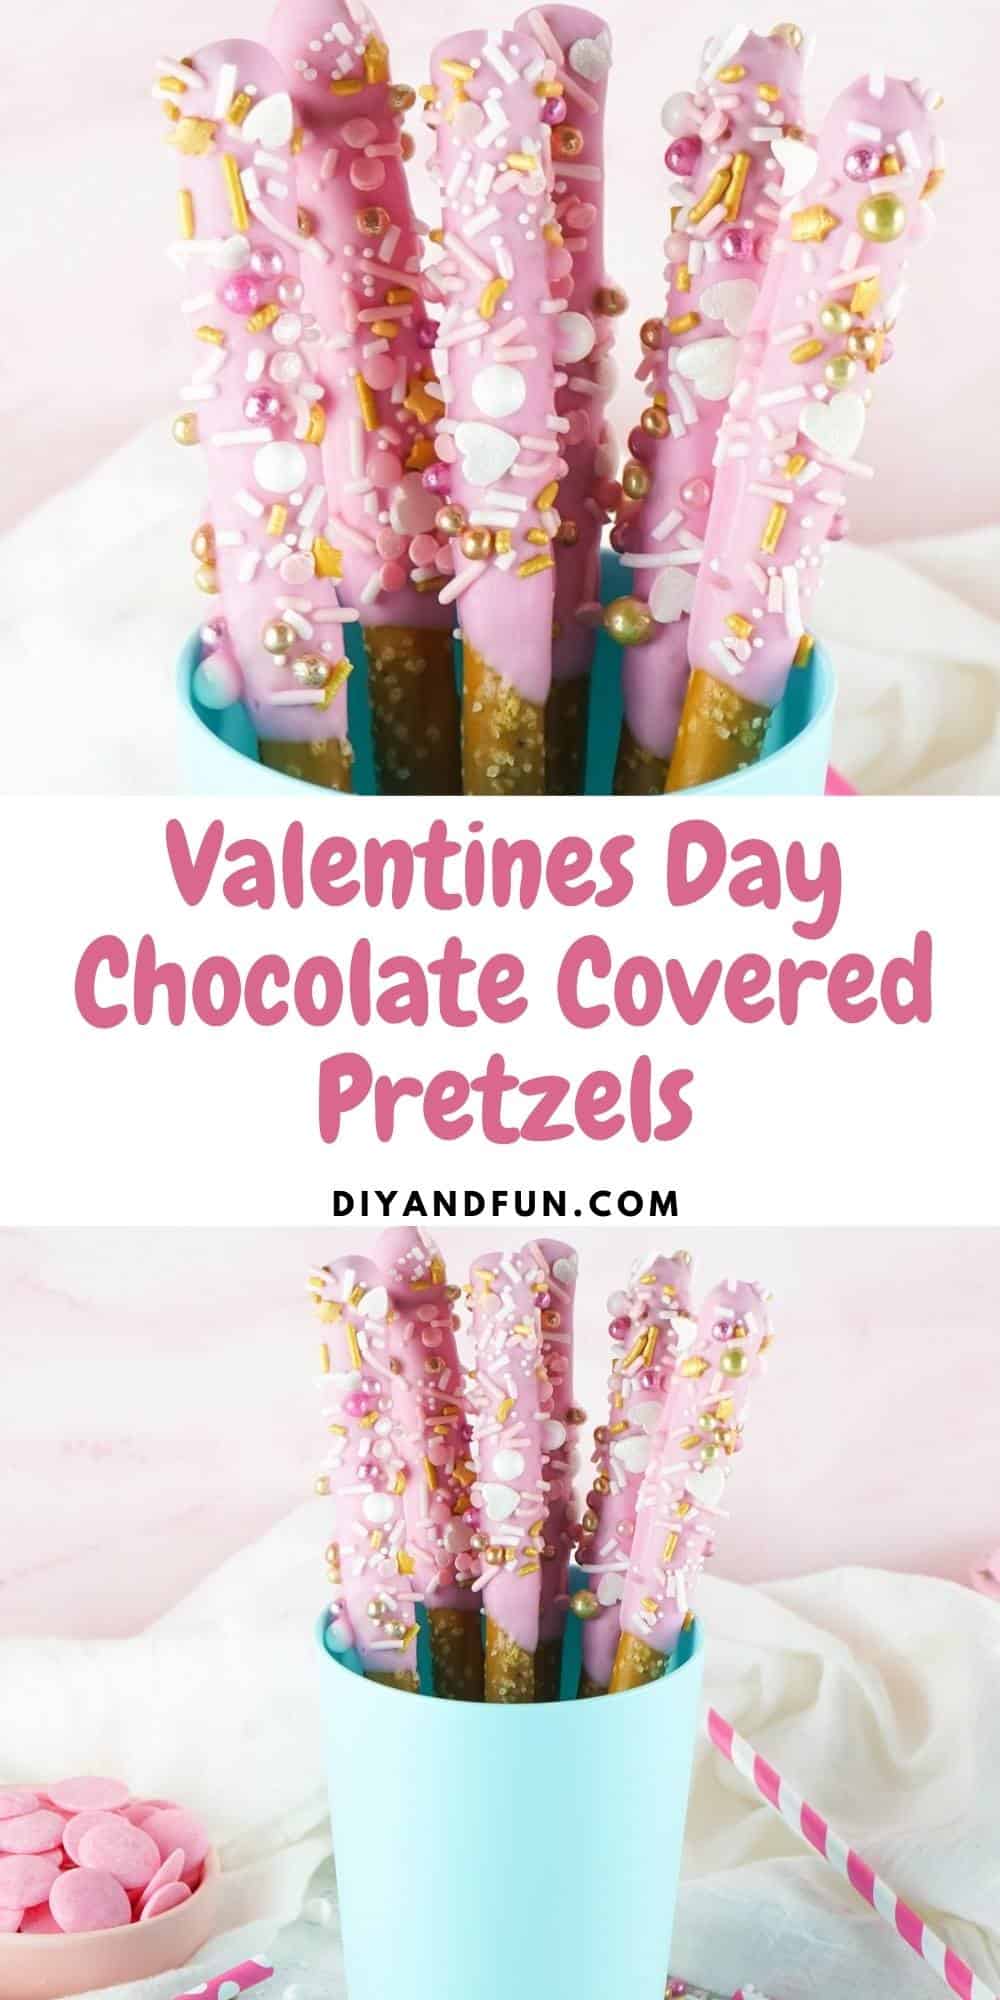 Valentines Day Chocolate Covered Pretzels, a simple recipe for pink chocolate covered pretzel rods with fun sprinkles.